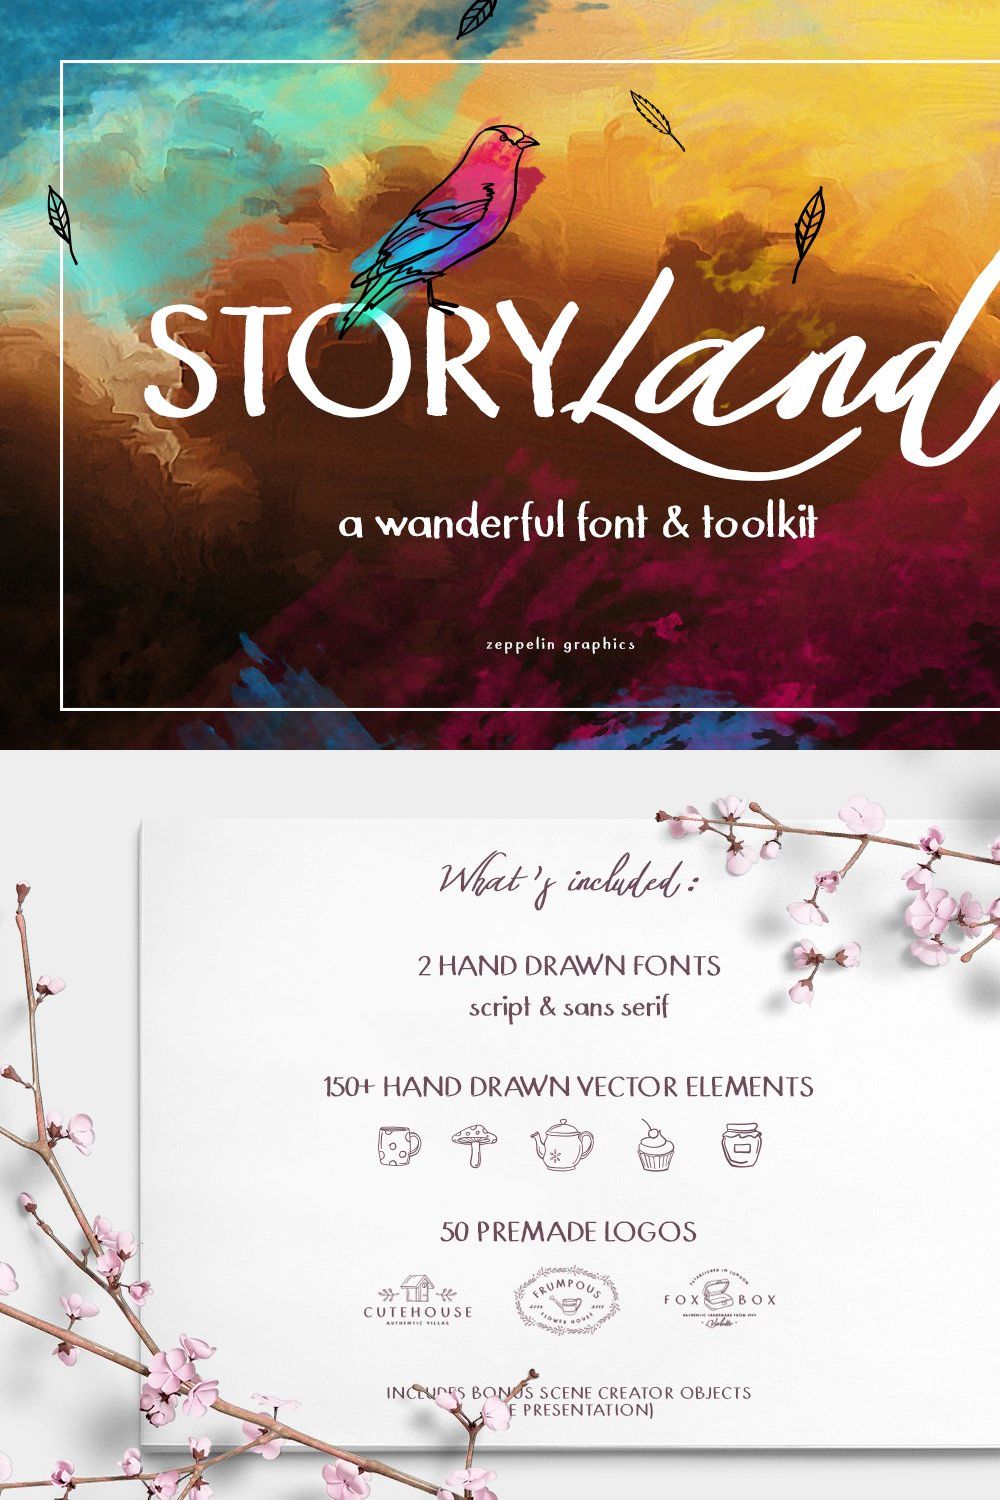 Storyland Font & Toolkit pinterest preview image.